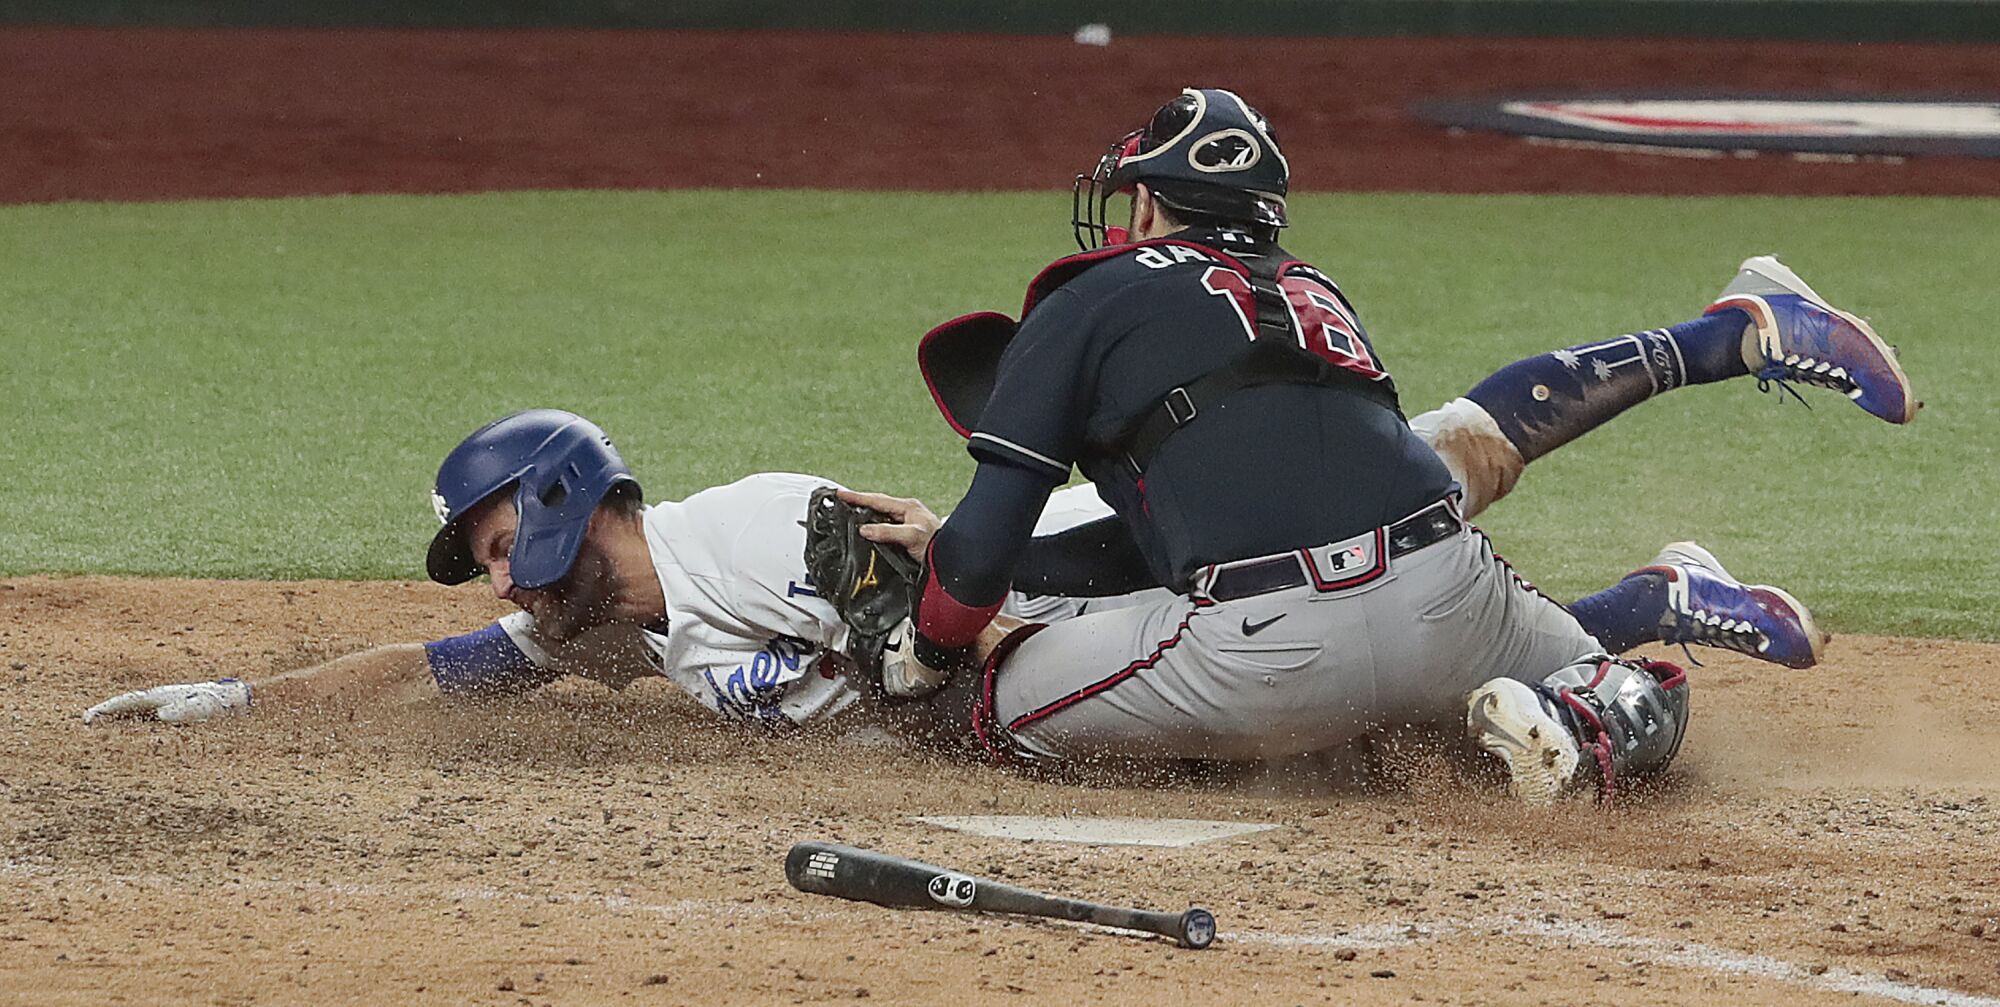 Catcher Travis d'Arnaud tags out Chris Taylor as Taylor tries to slide head first into home plate.